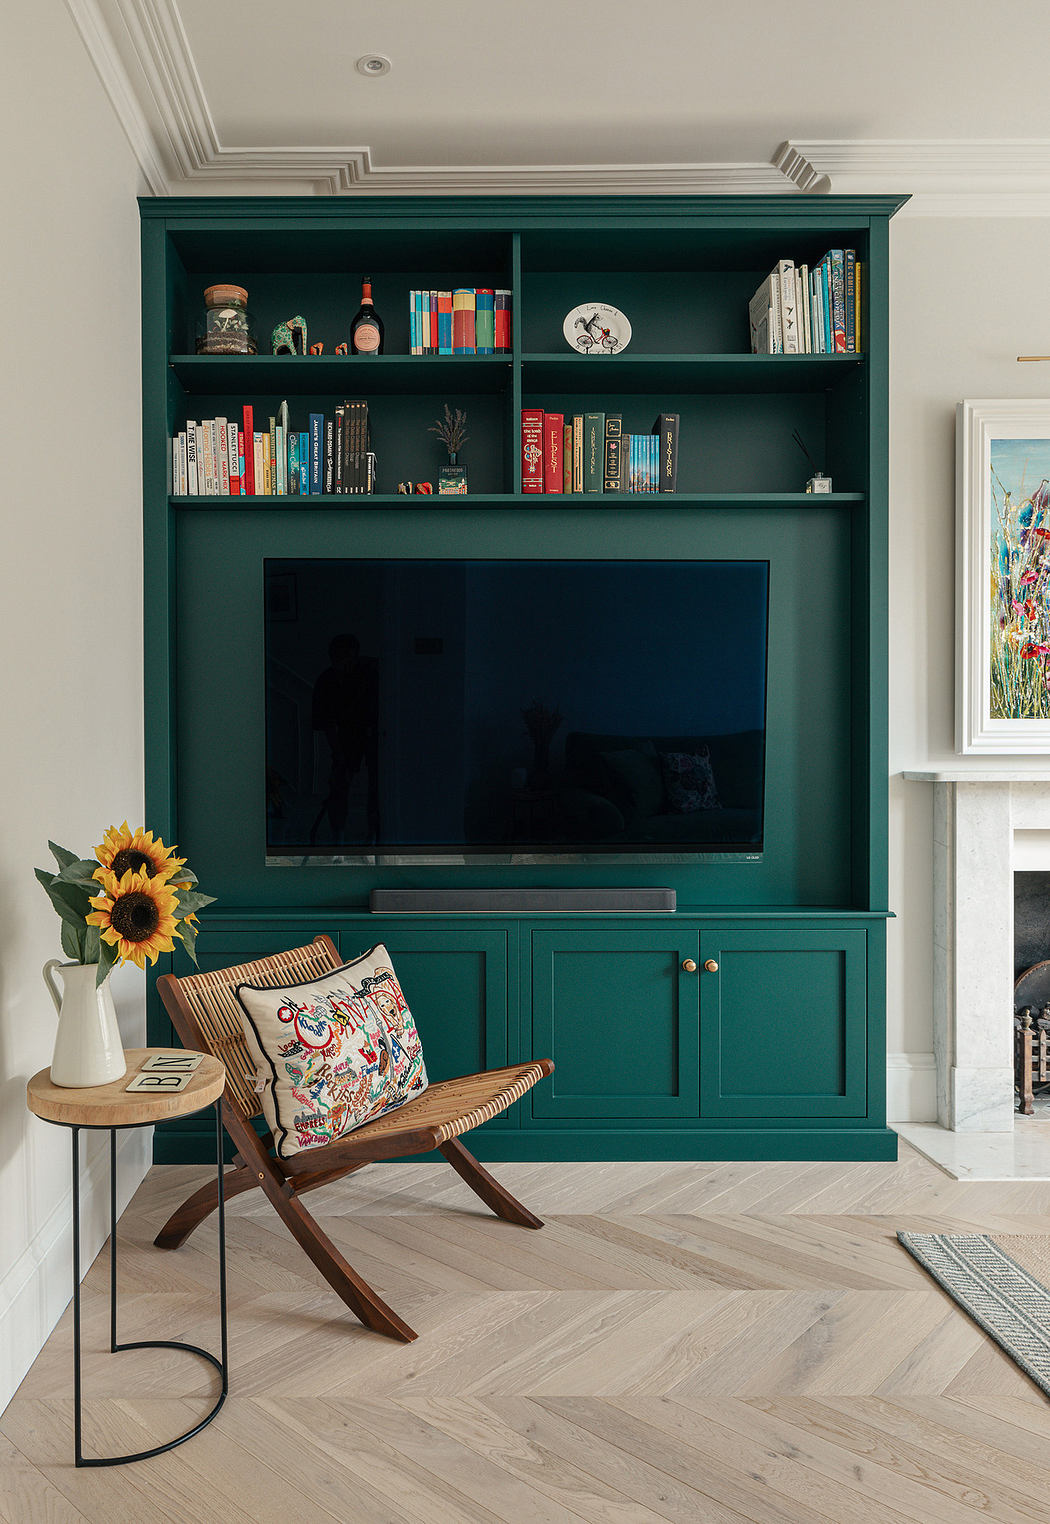 Elegant living room with a green built-in bookshelf, modern chair, and